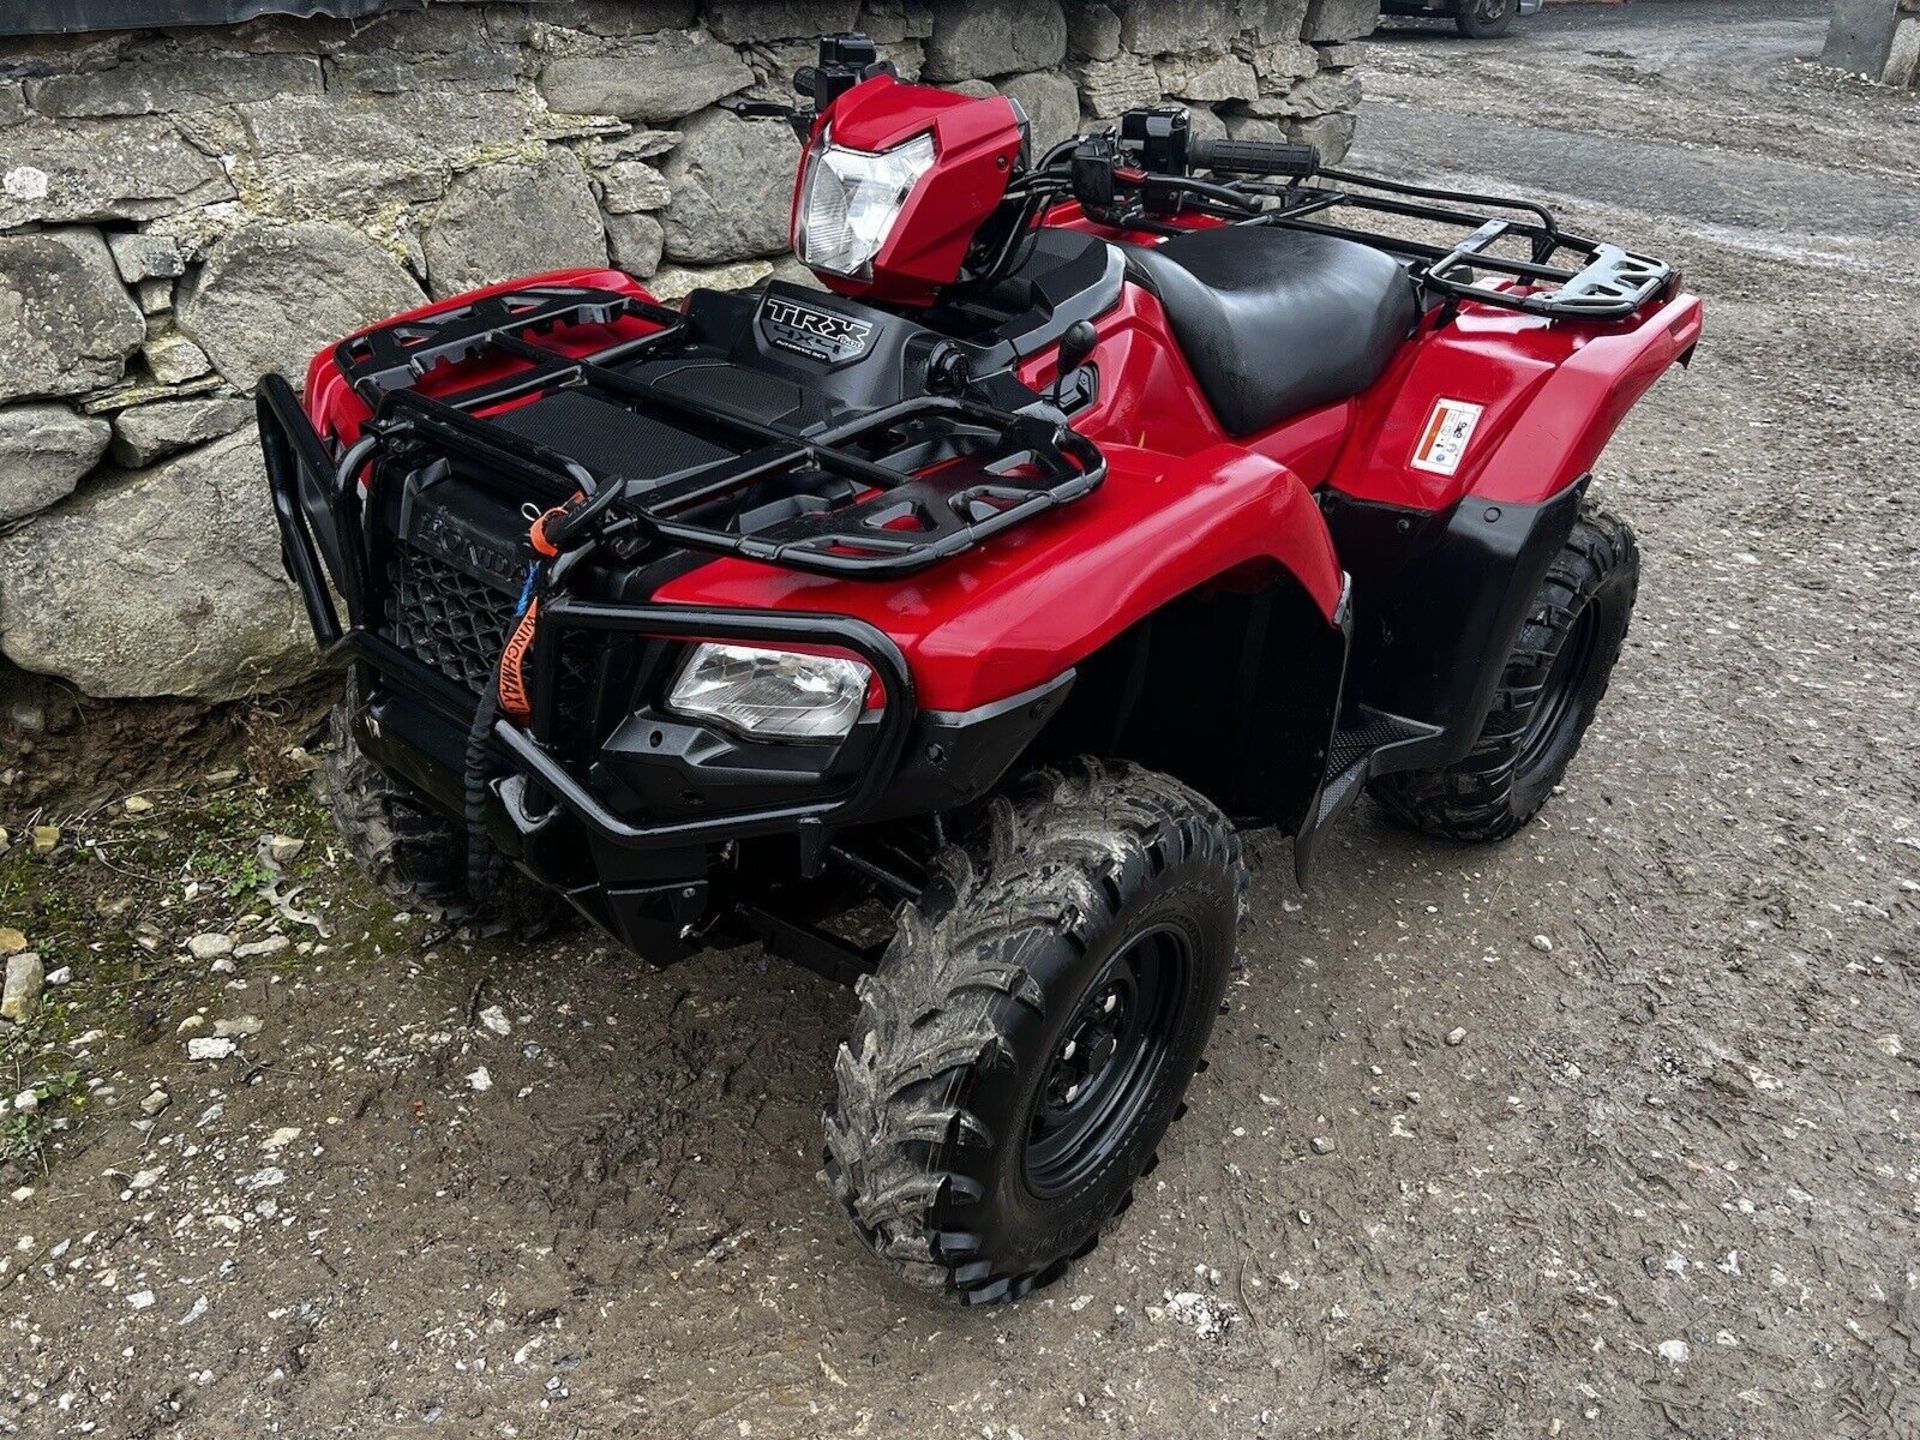 EPS PIONEER: HONDA TRX 500 FE QUAD WITH ELECTRIC POWER STEERING - Image 6 of 8